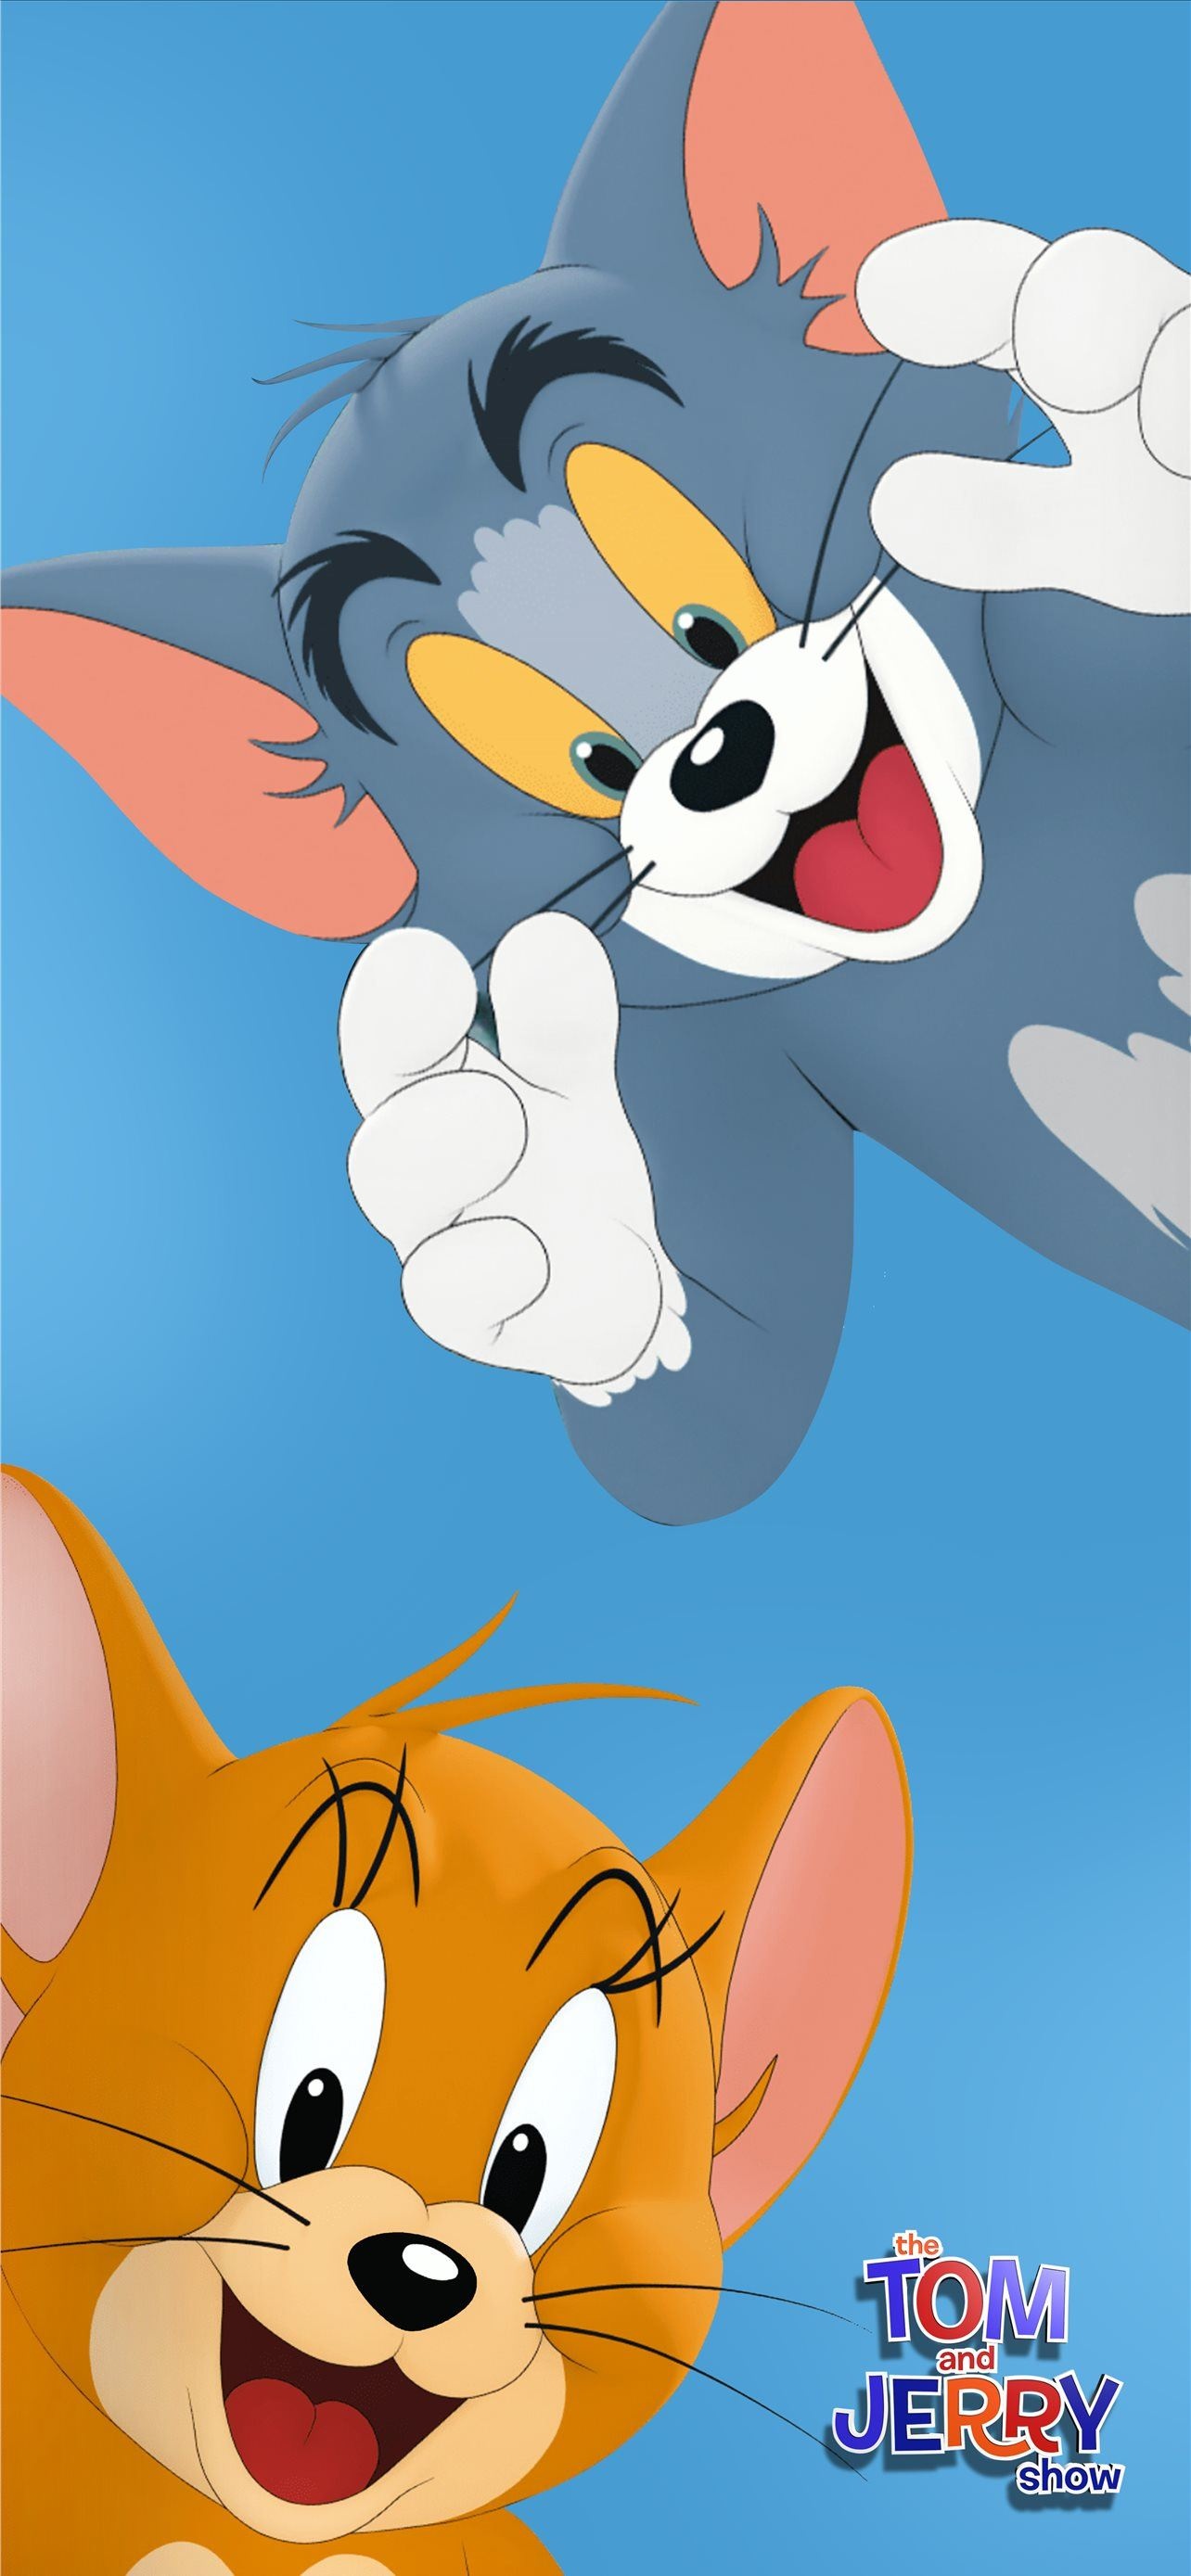 The Tom and Jerry show, iPhone wallpapers, Cute illustrations, Cartoon nostalgia, 1290x2780 HD Phone